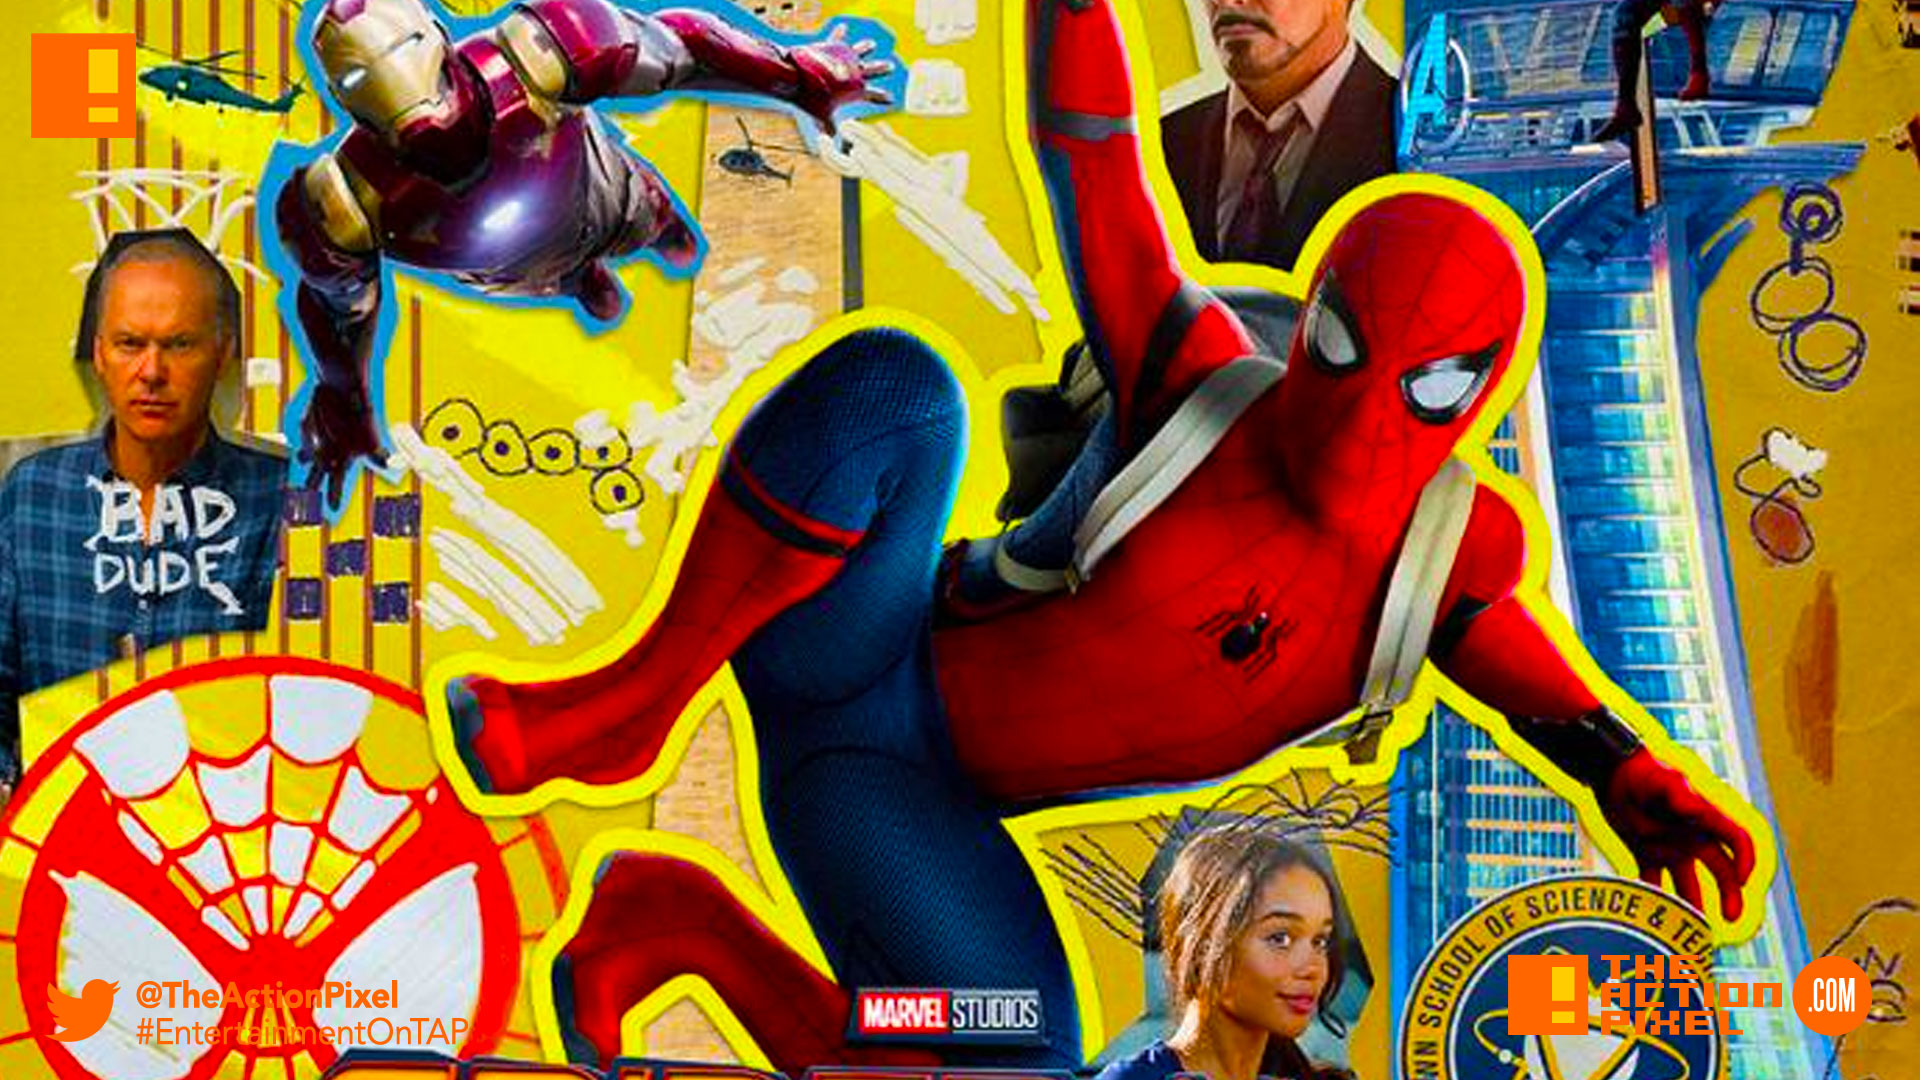 spider-man, spider-man homecoming, the action pixel, marvel,sony, sony pictures, tom holland, iron man, peter parker, vulture, tony stark, entertainment on tap, poster, iron man, imax, spiderman,poster,